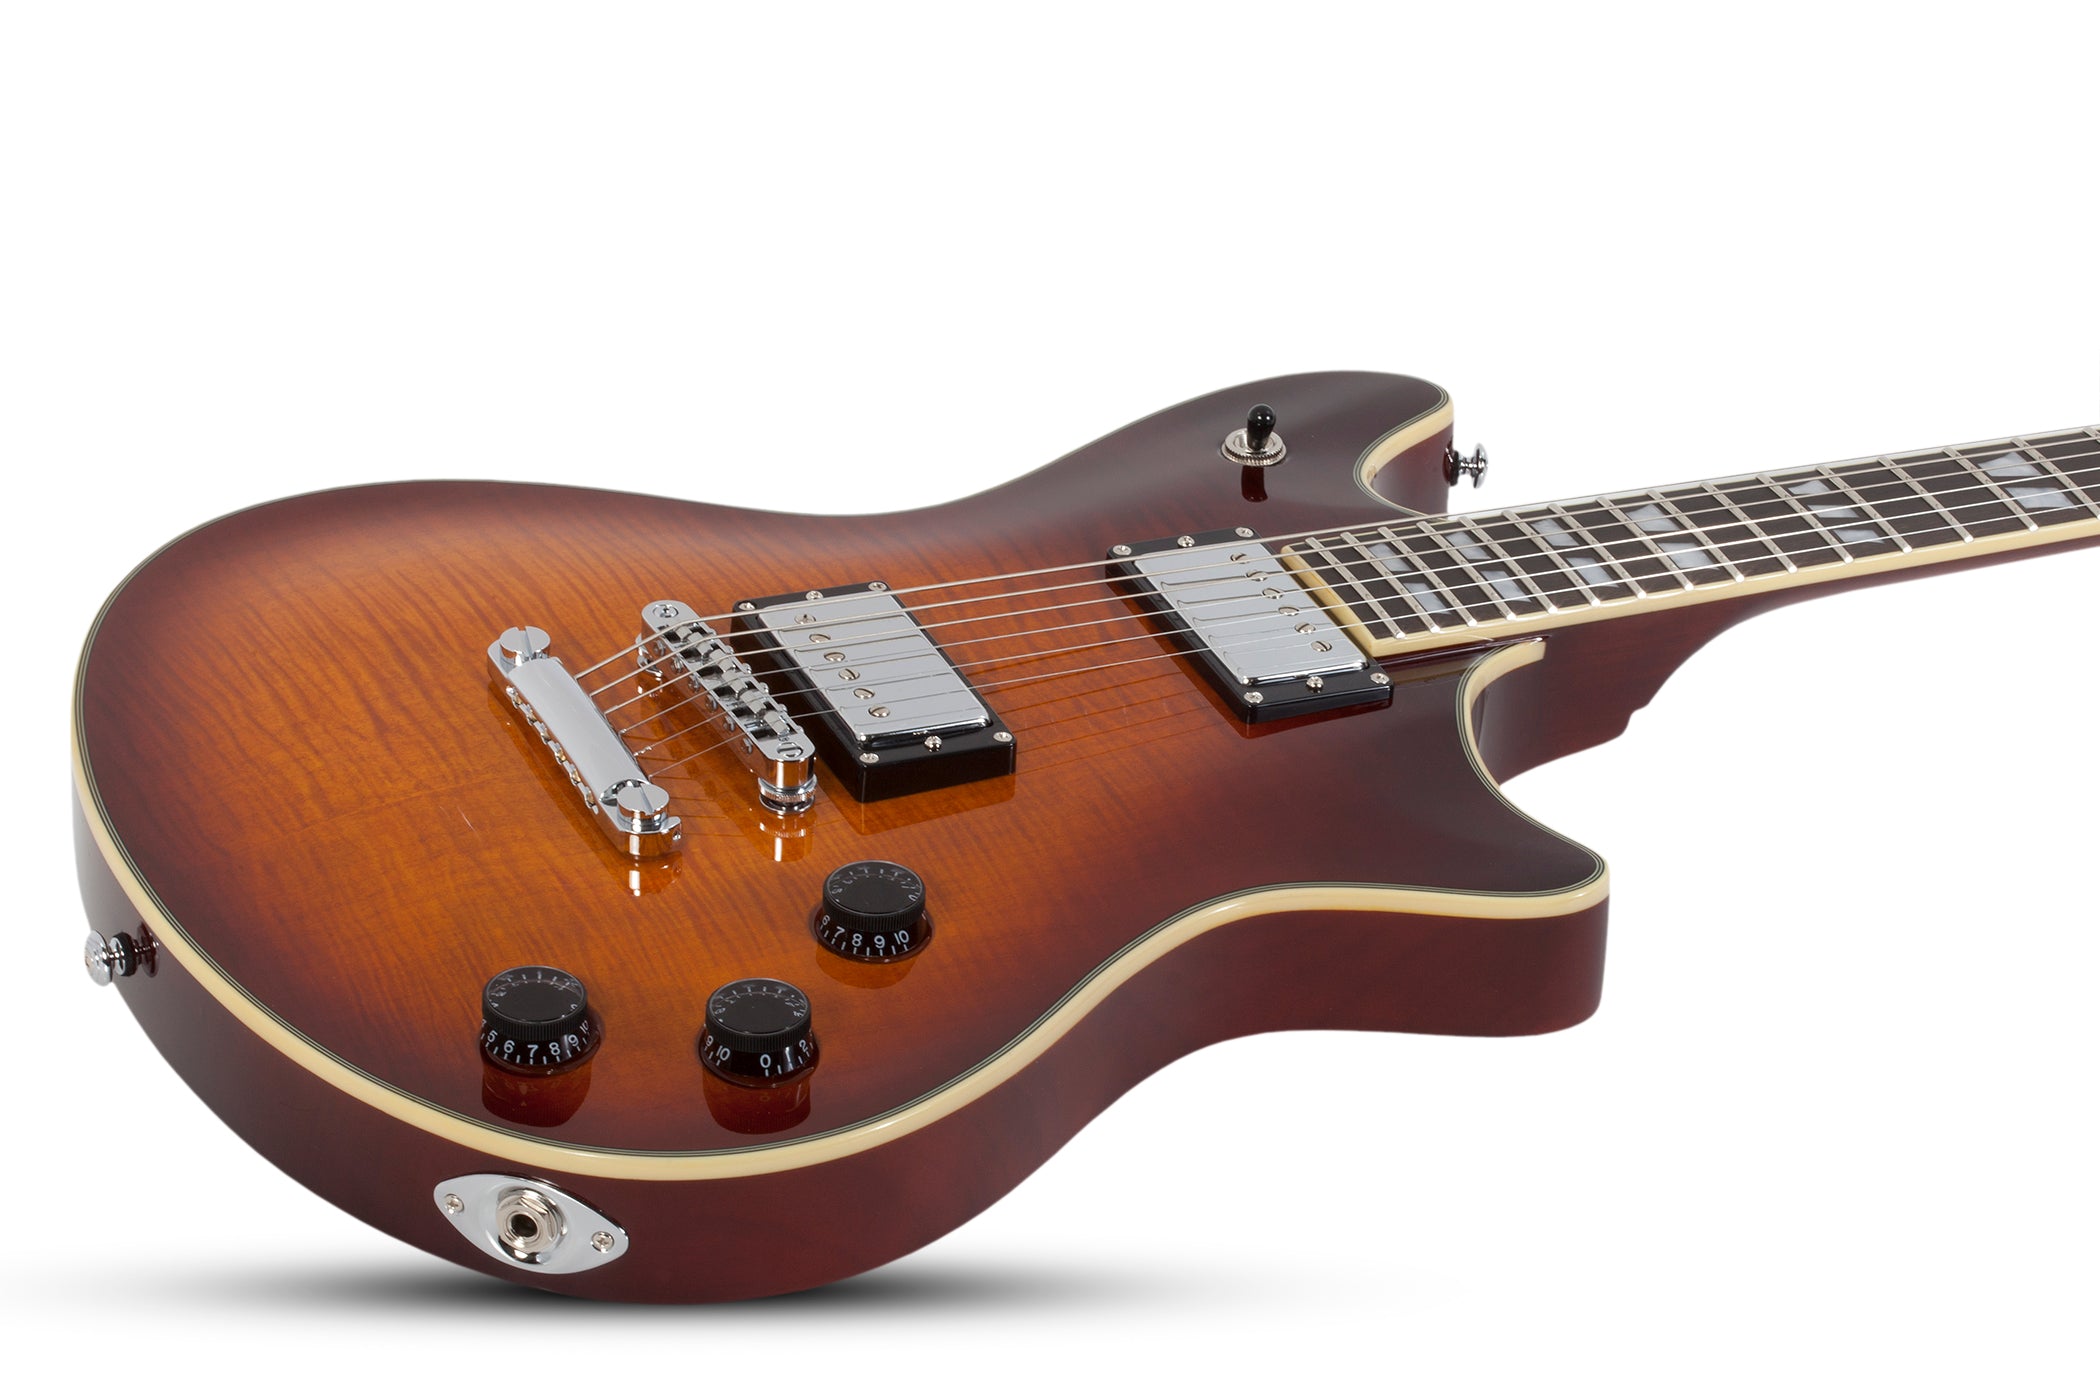 SCHECTER TEMPEST CUSTOM ELECTRIC GUITAR - FADED VINTAGE SUNBURST (1725) MADE IN KOREA, SCHECTER, ELECTRIC GUITAR, schecter-electric-guitar-tempest-custom-fvs, ZOSO MUSIC SDN BHD